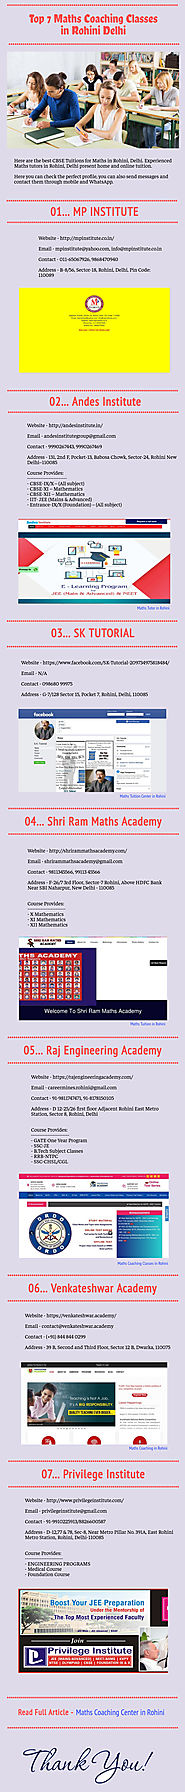 Top 7 Best Maths Tuition in Rohini Delhi | Infographic